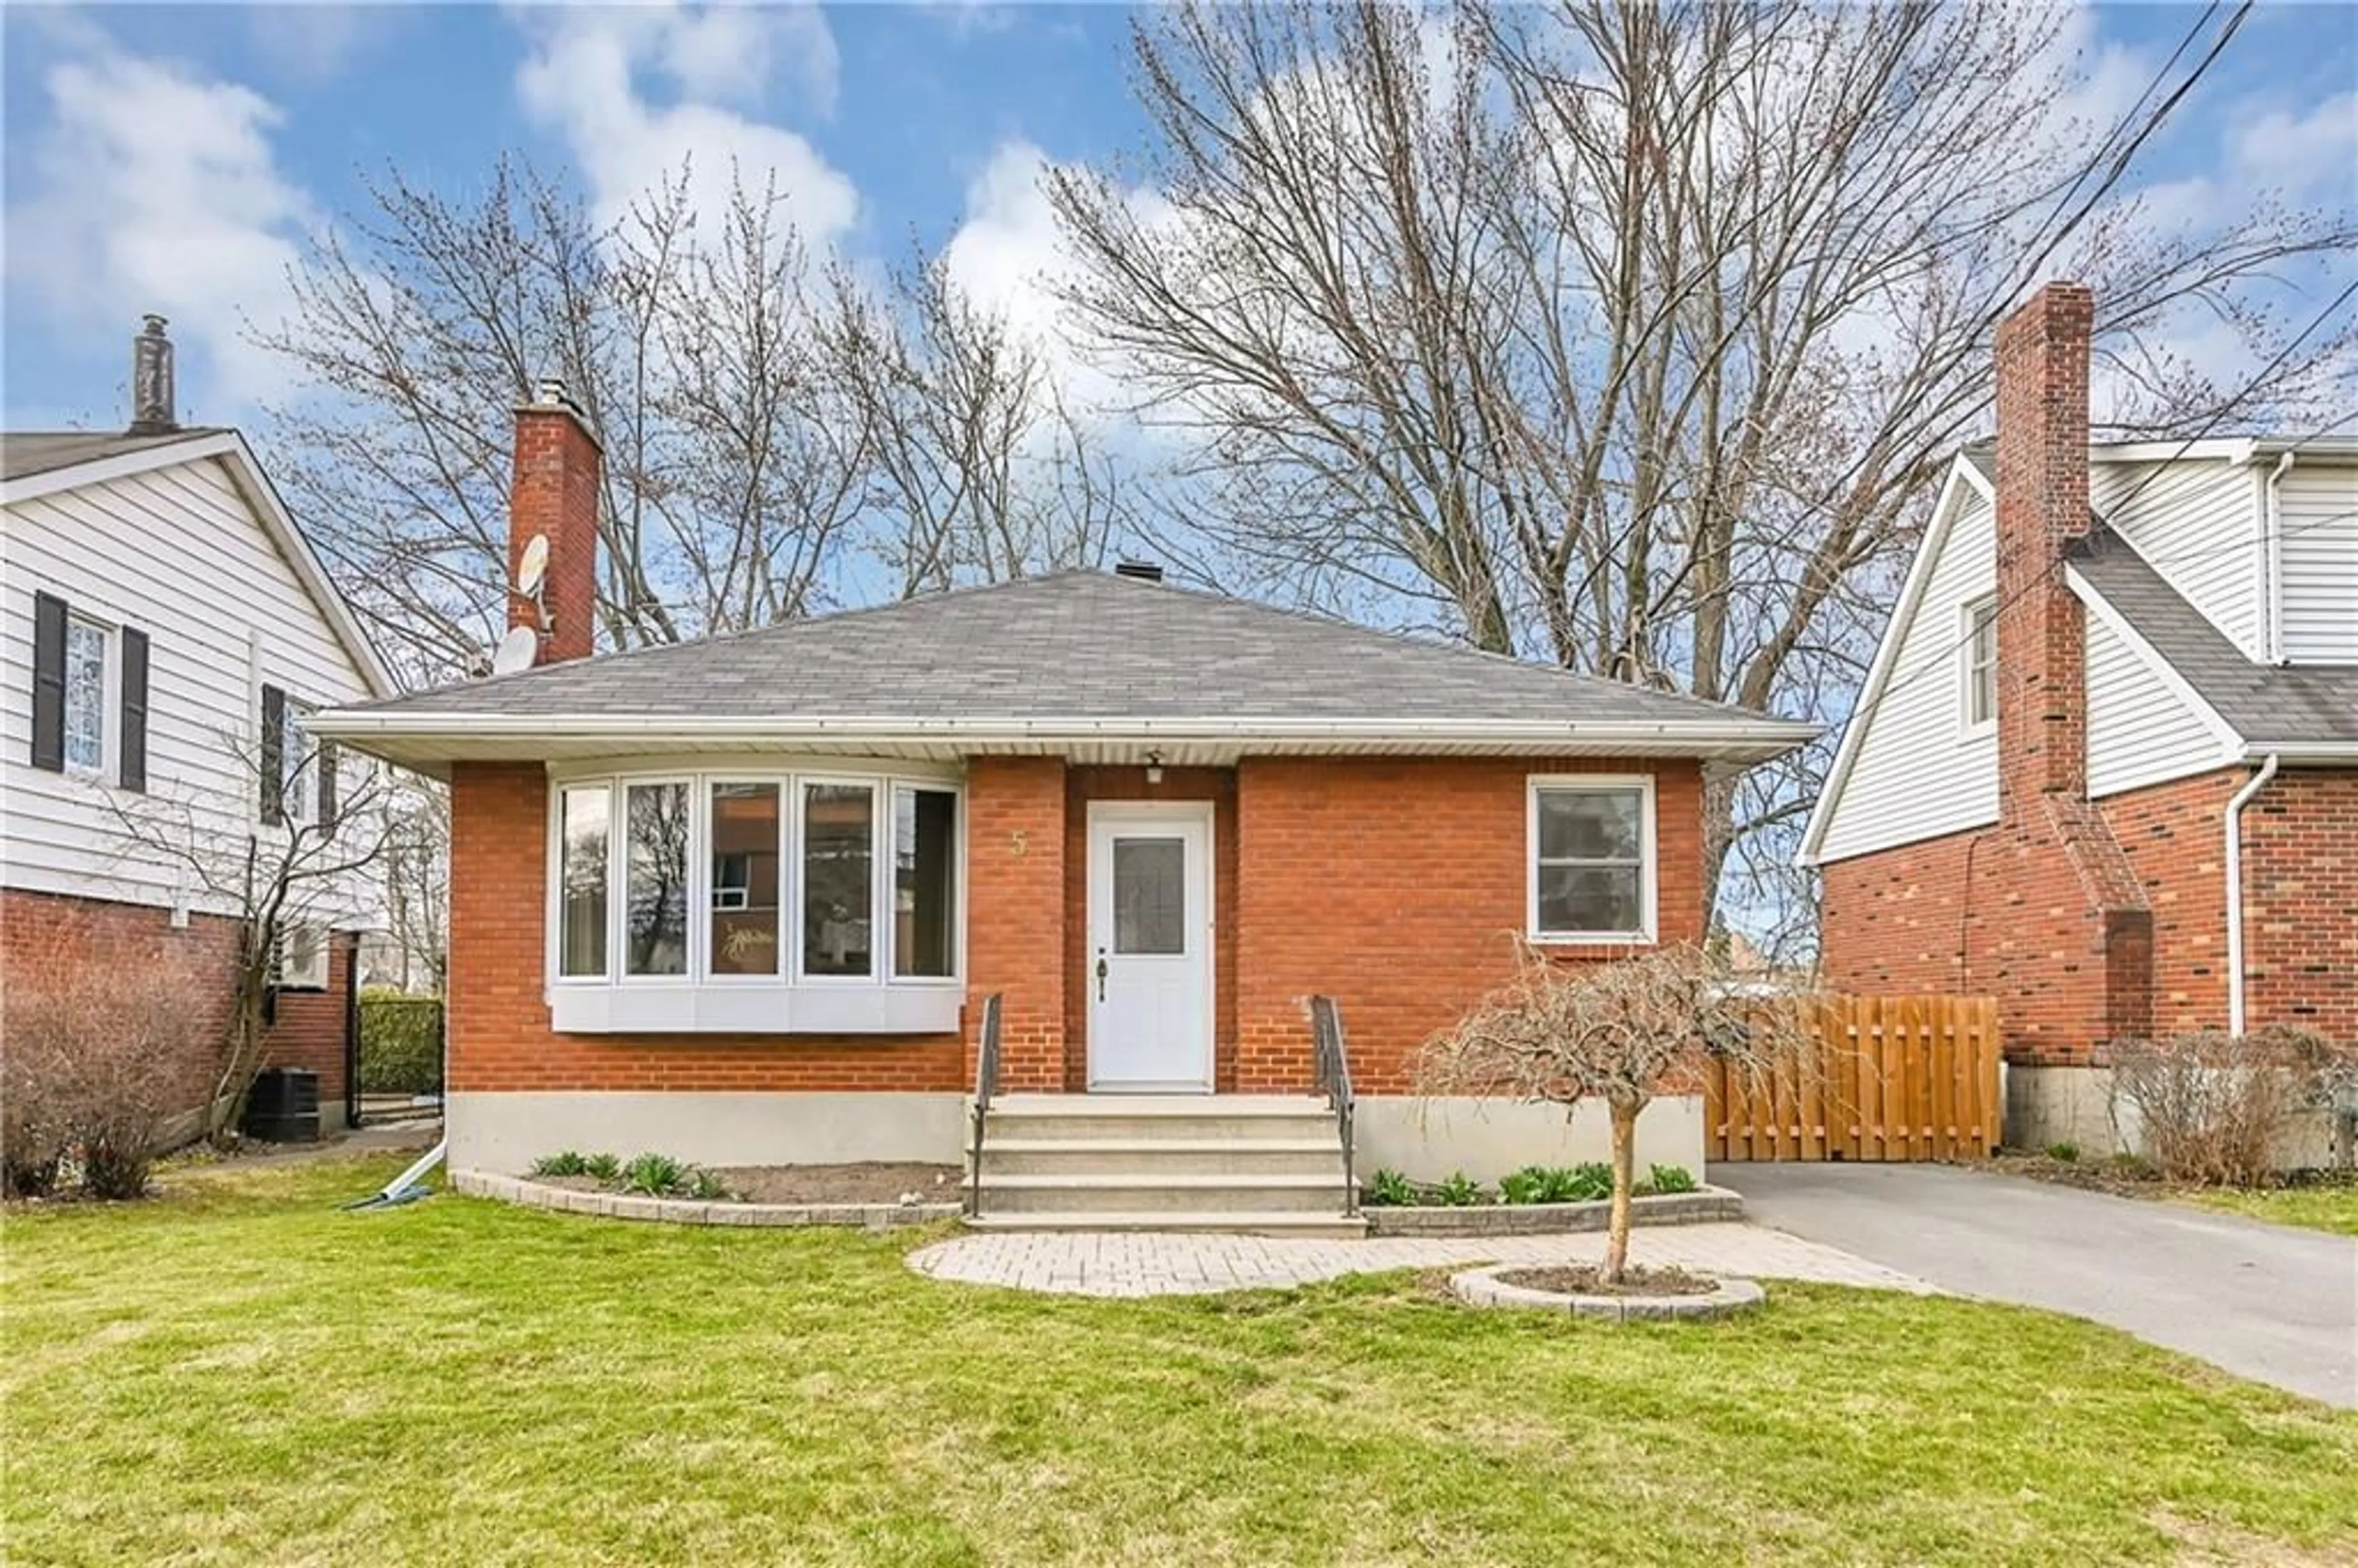 Home with brick exterior material for 5 OLD ORCHARD Ave, Cornwall Ontario K6H 2H1